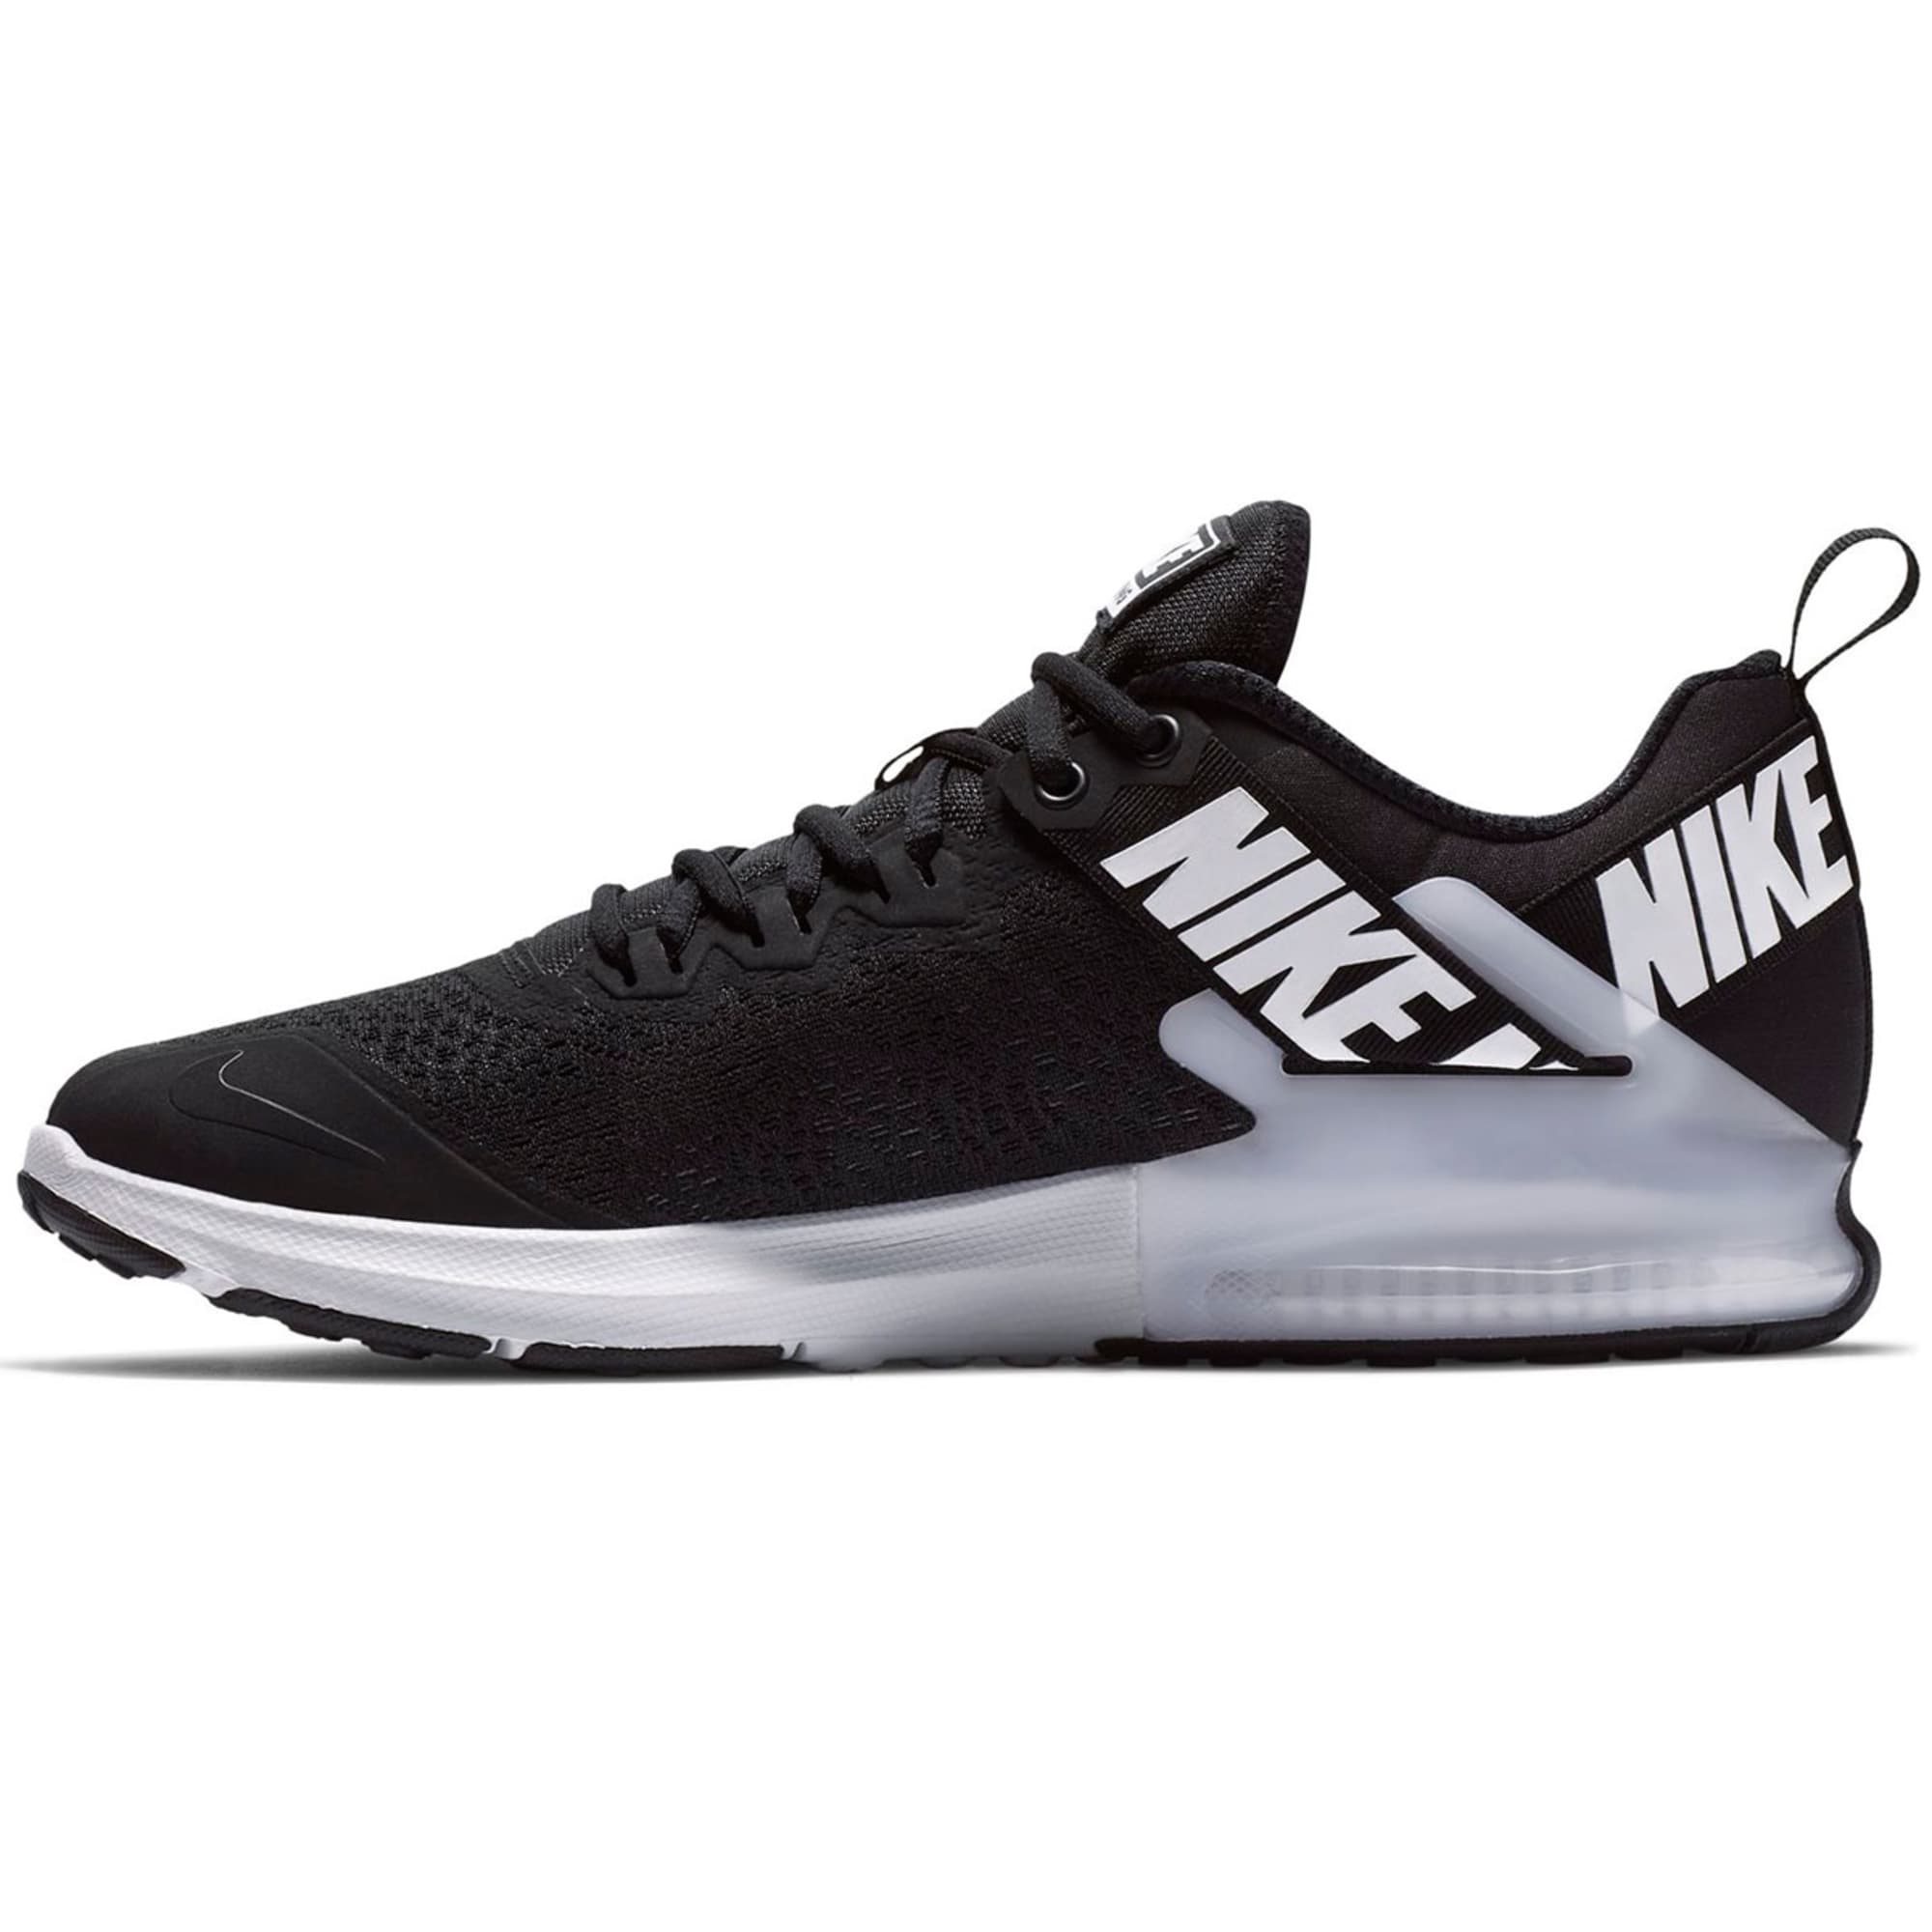 Bueno Asesor Paralizar NIKE Men's Zoom Domination TR 2 Cross-Training Shoes - Bob's Stores